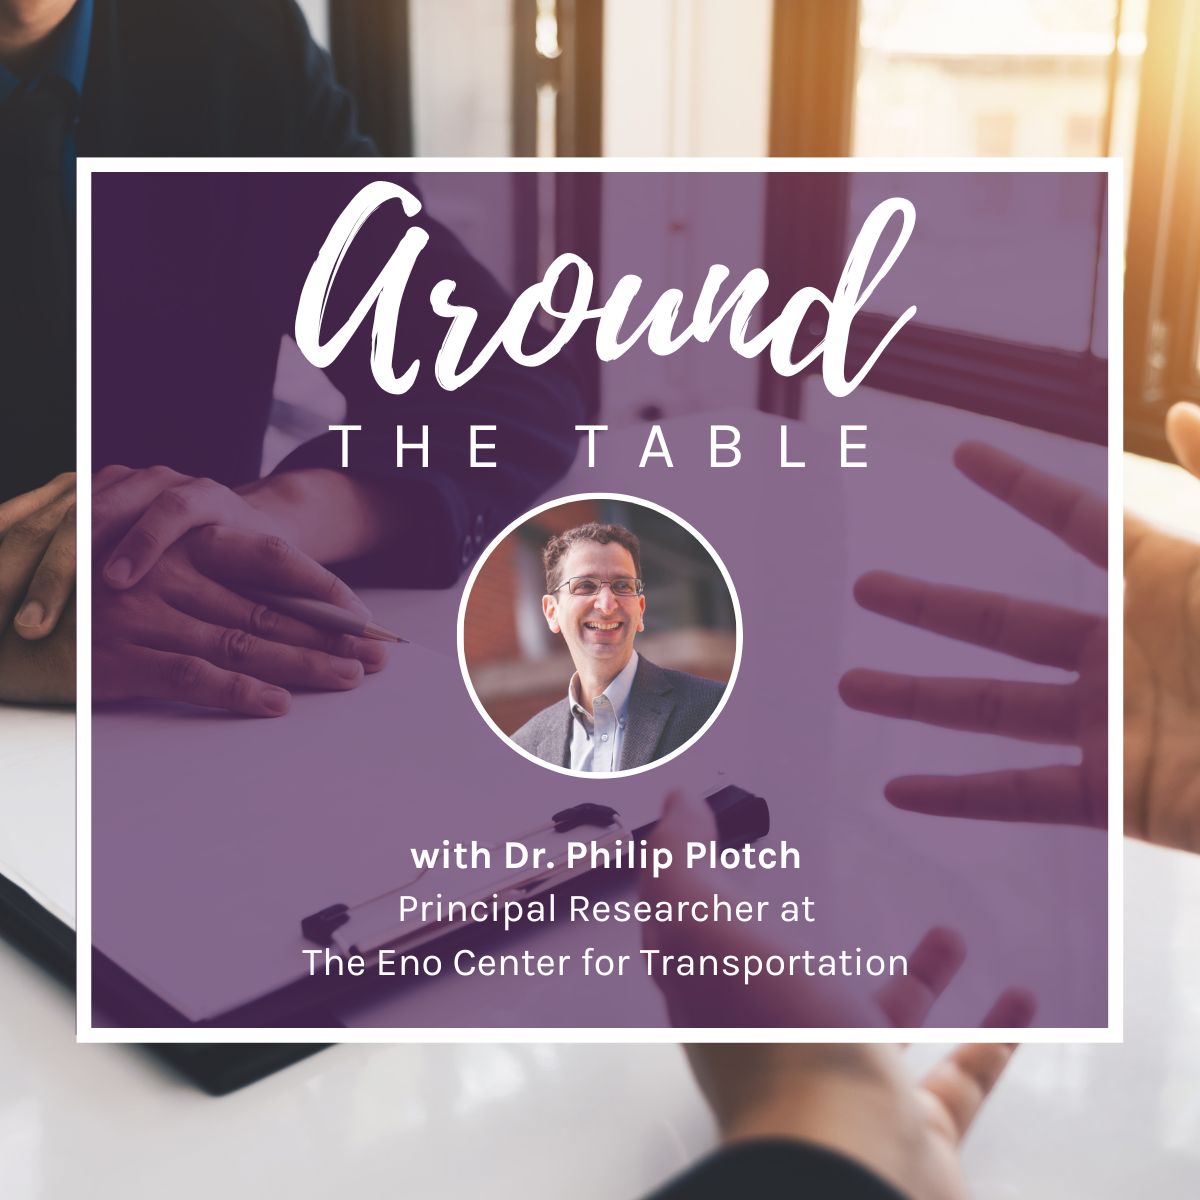 Around the Table graphic with a headshot of Dr. Philip Plotch.